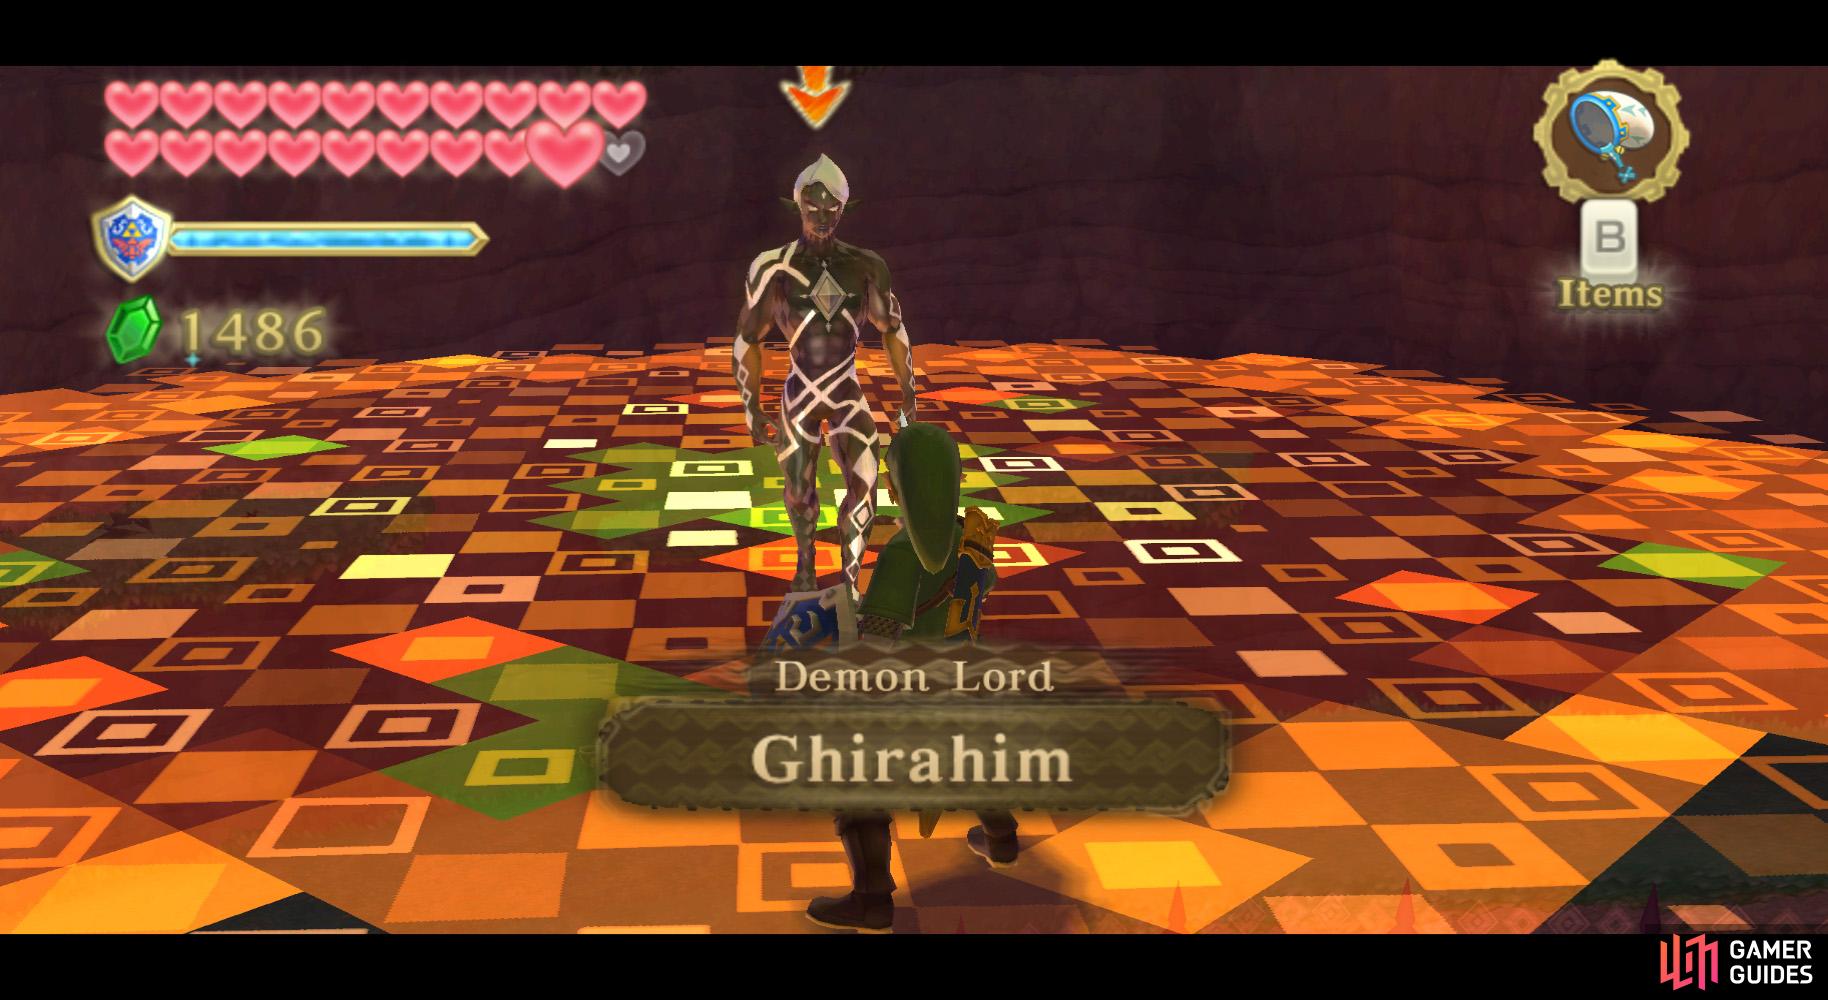 You're looking at Ghirahim in his final form.